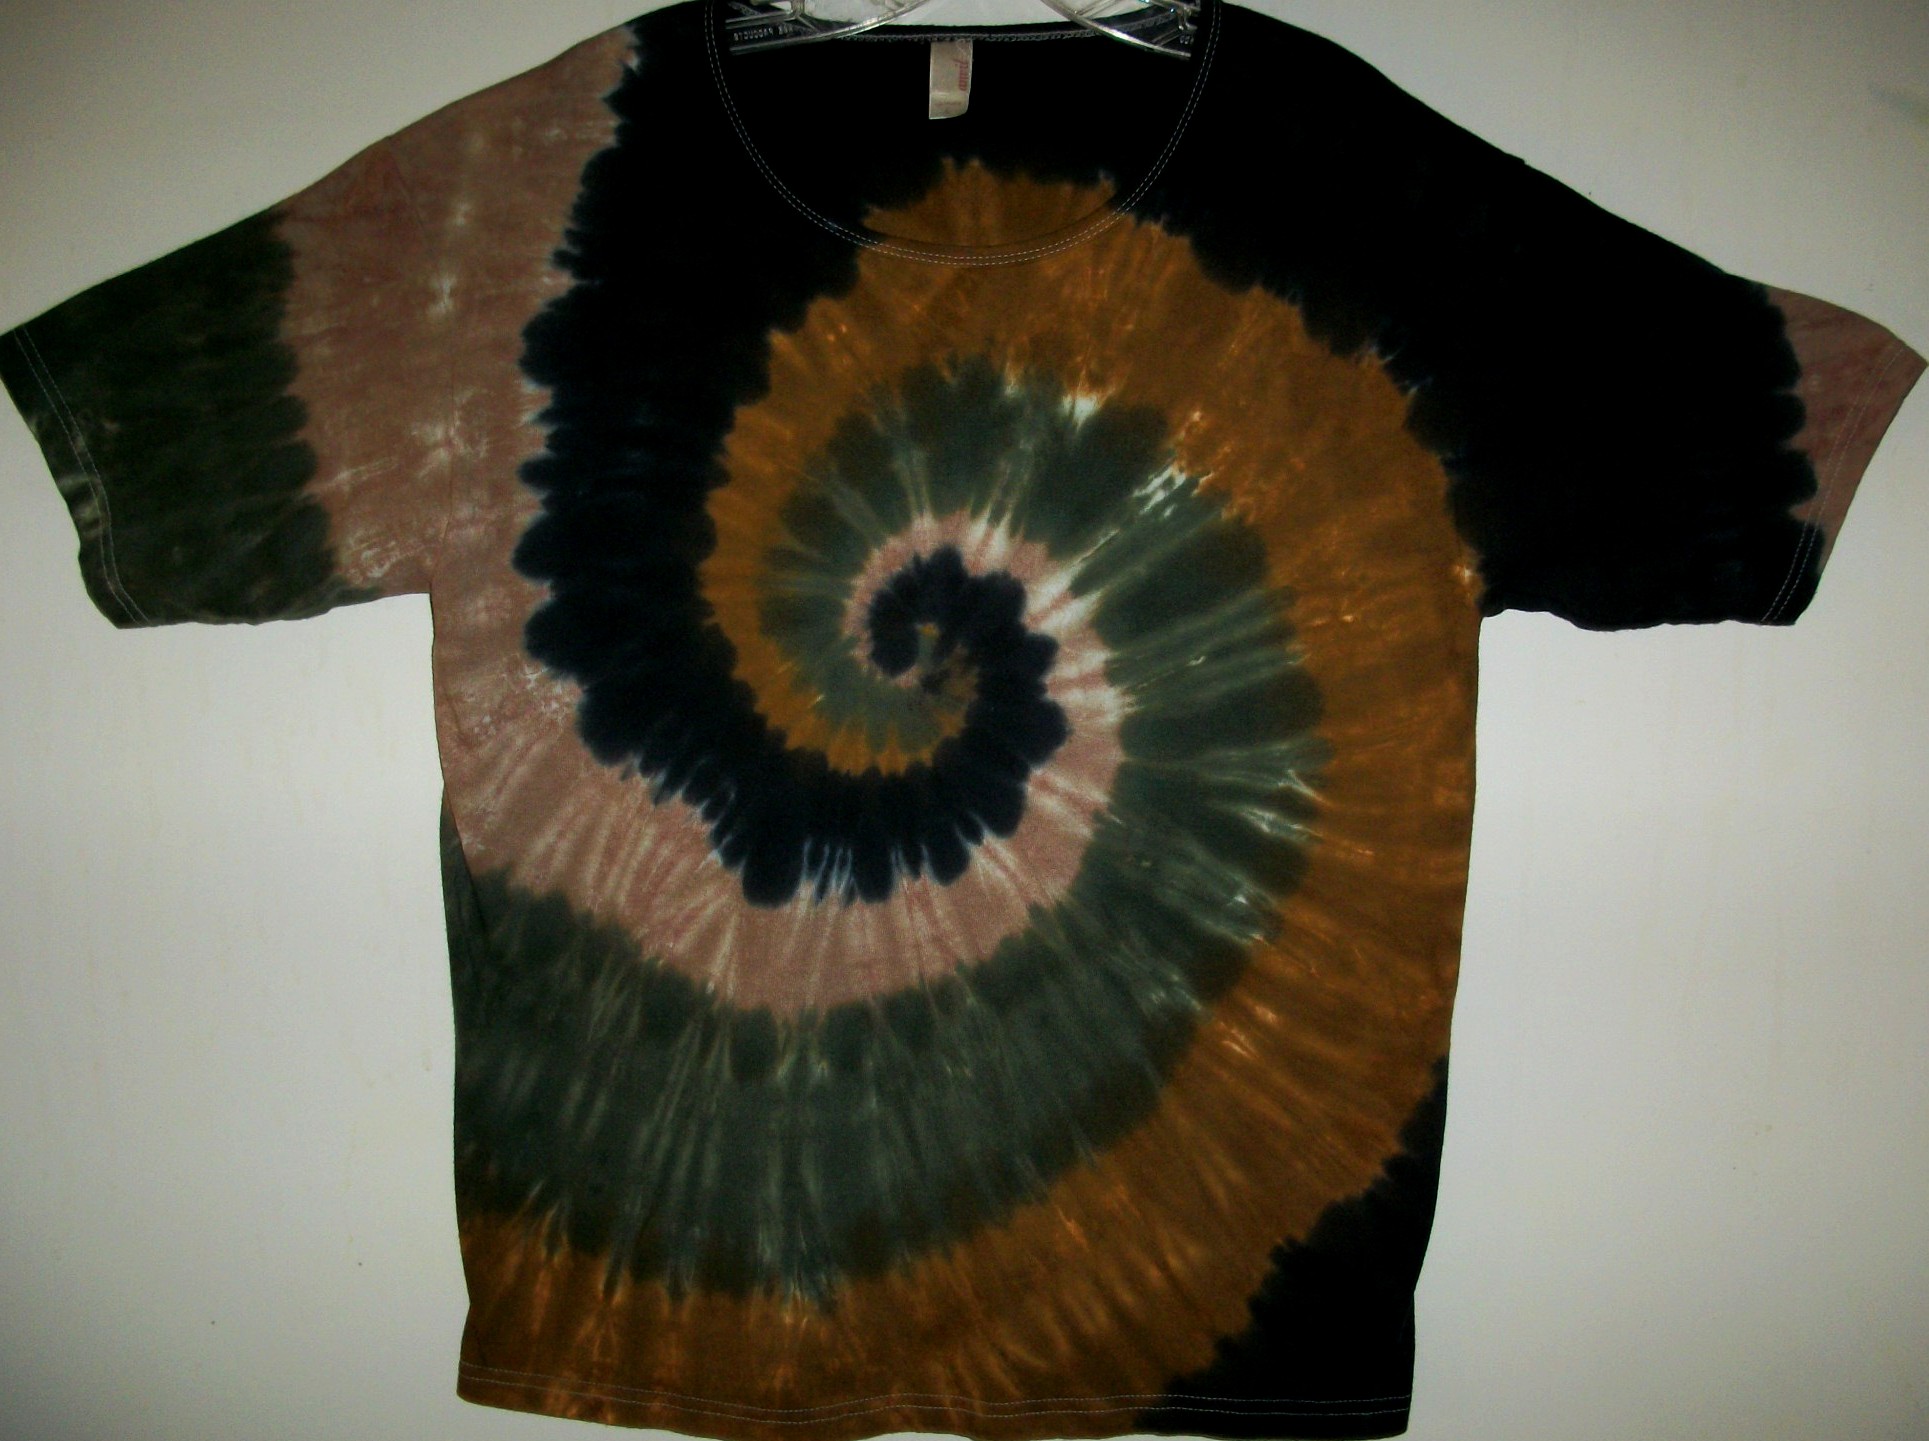  Camo Spiral Tie-dyed Tees